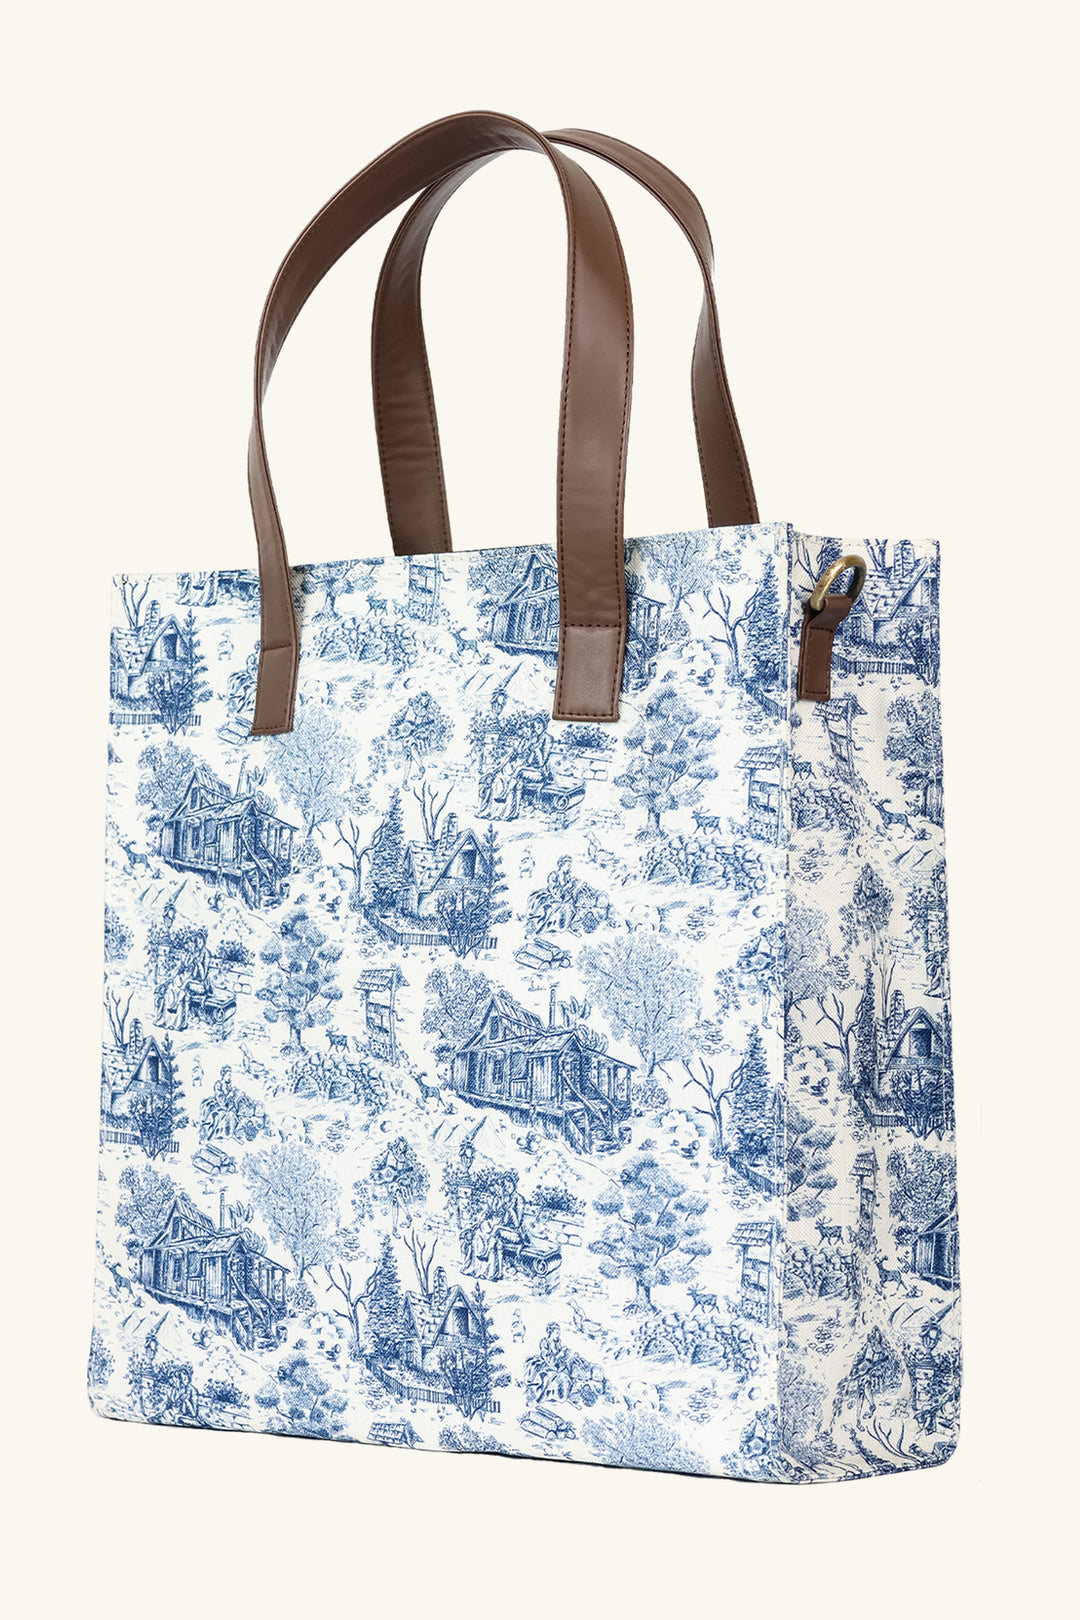 Two Tales | Tote Bag